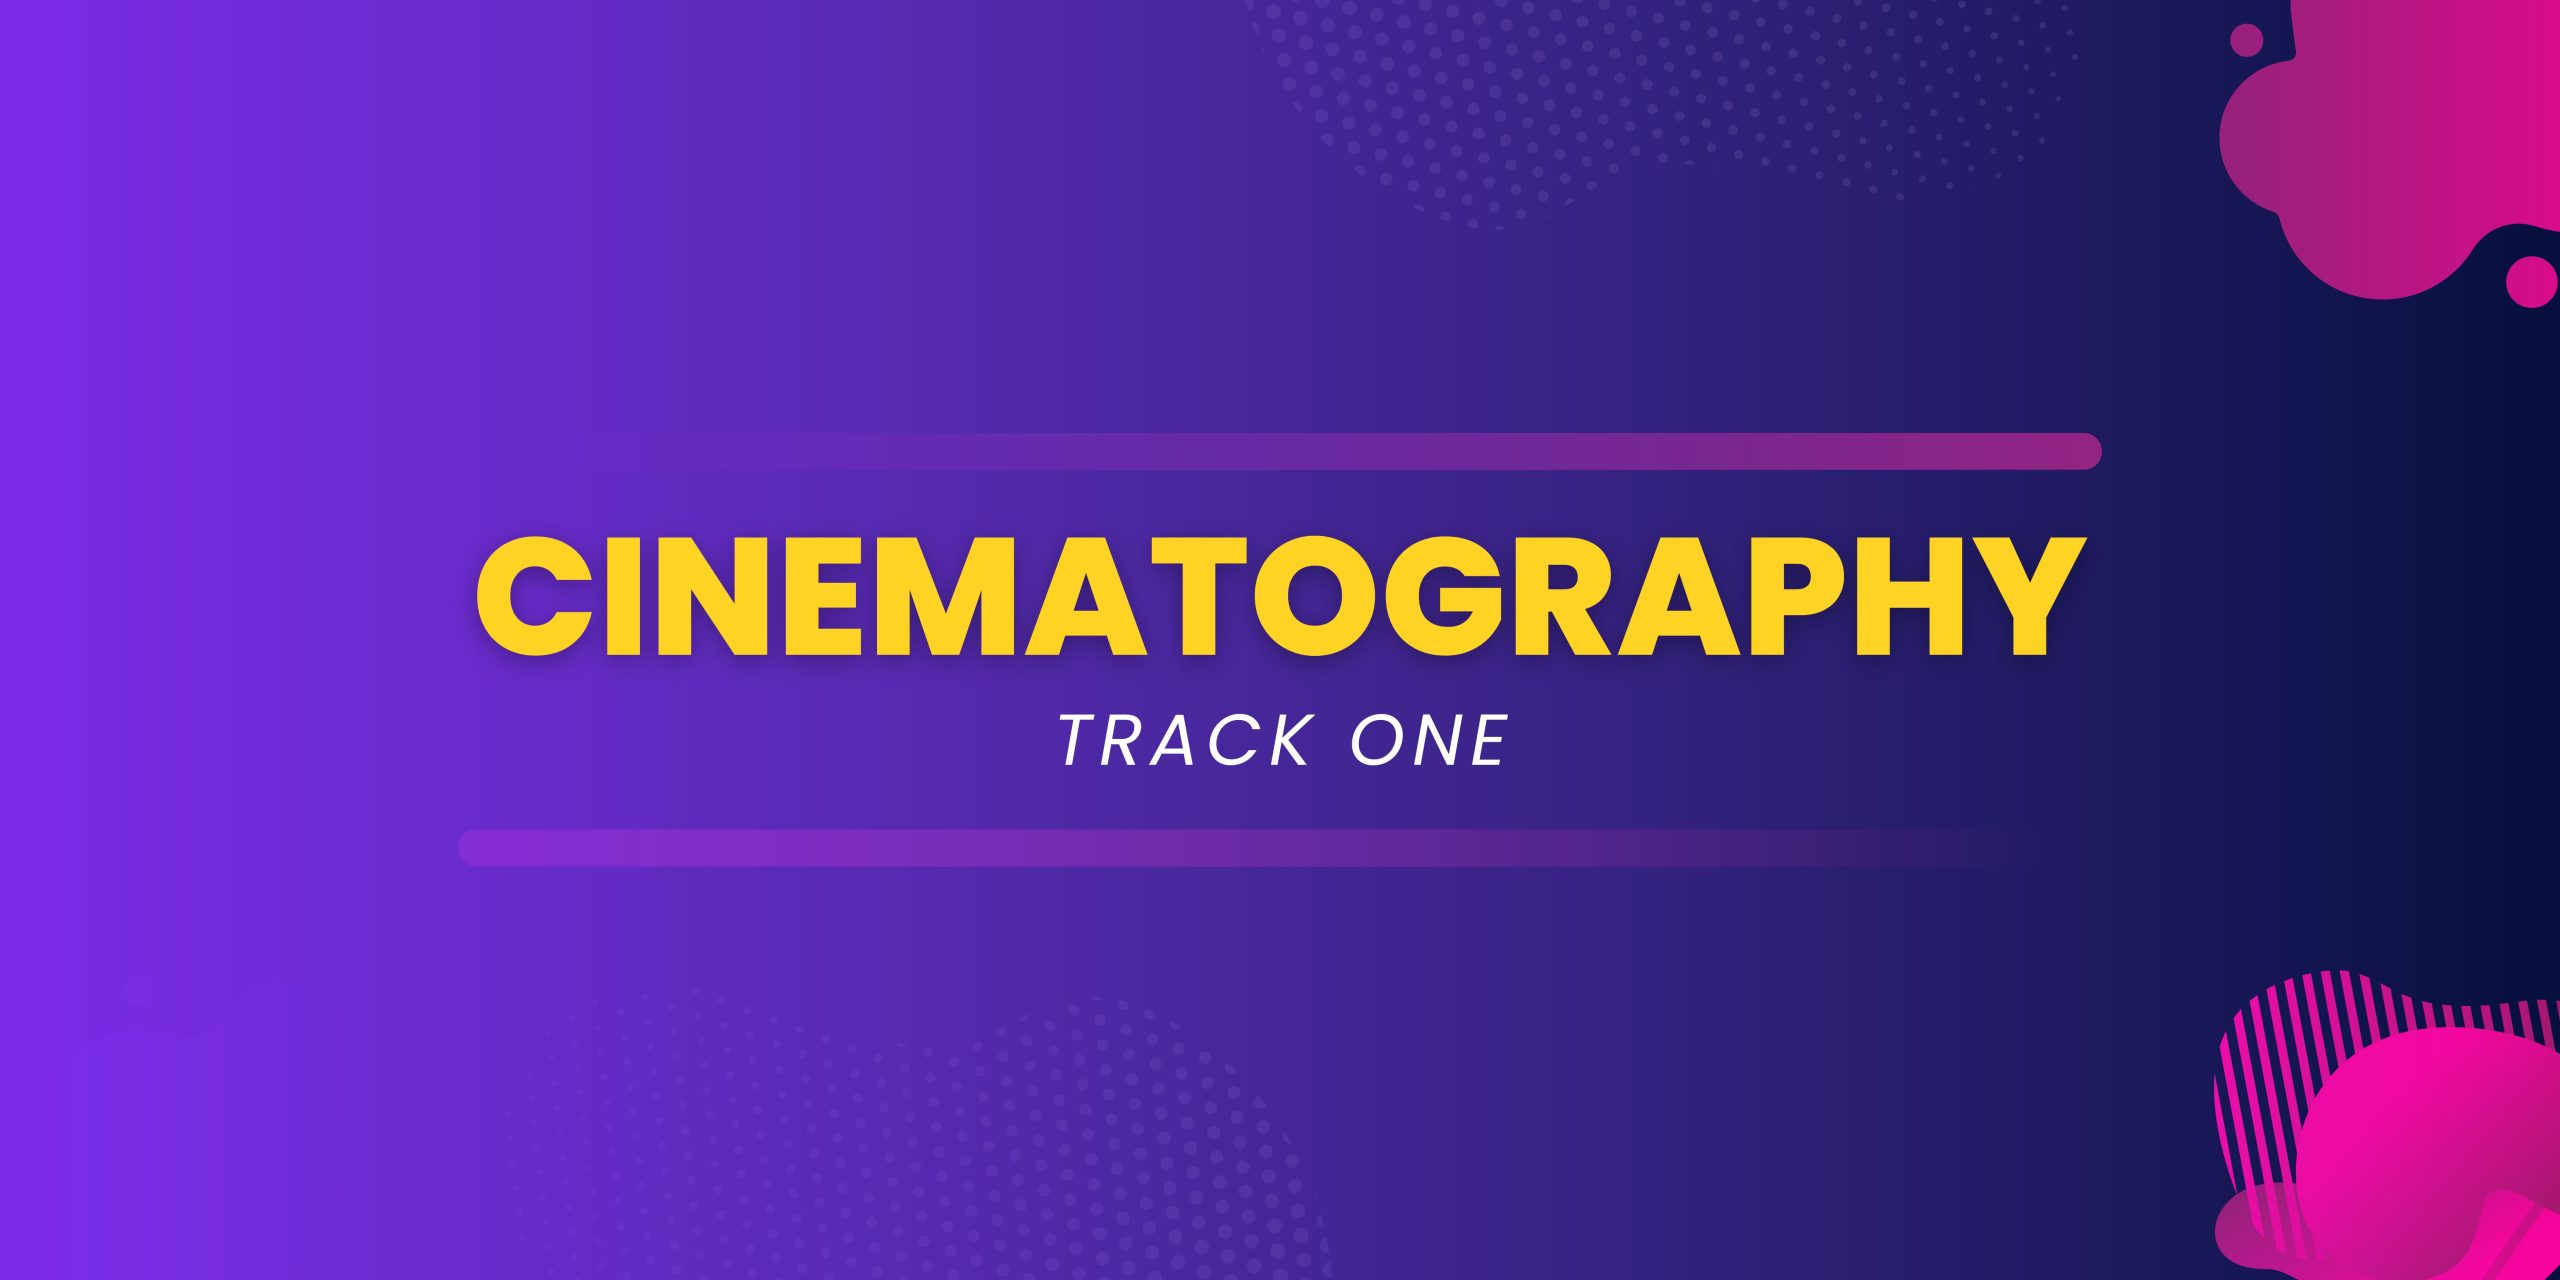 Cinematography Learning Track 1